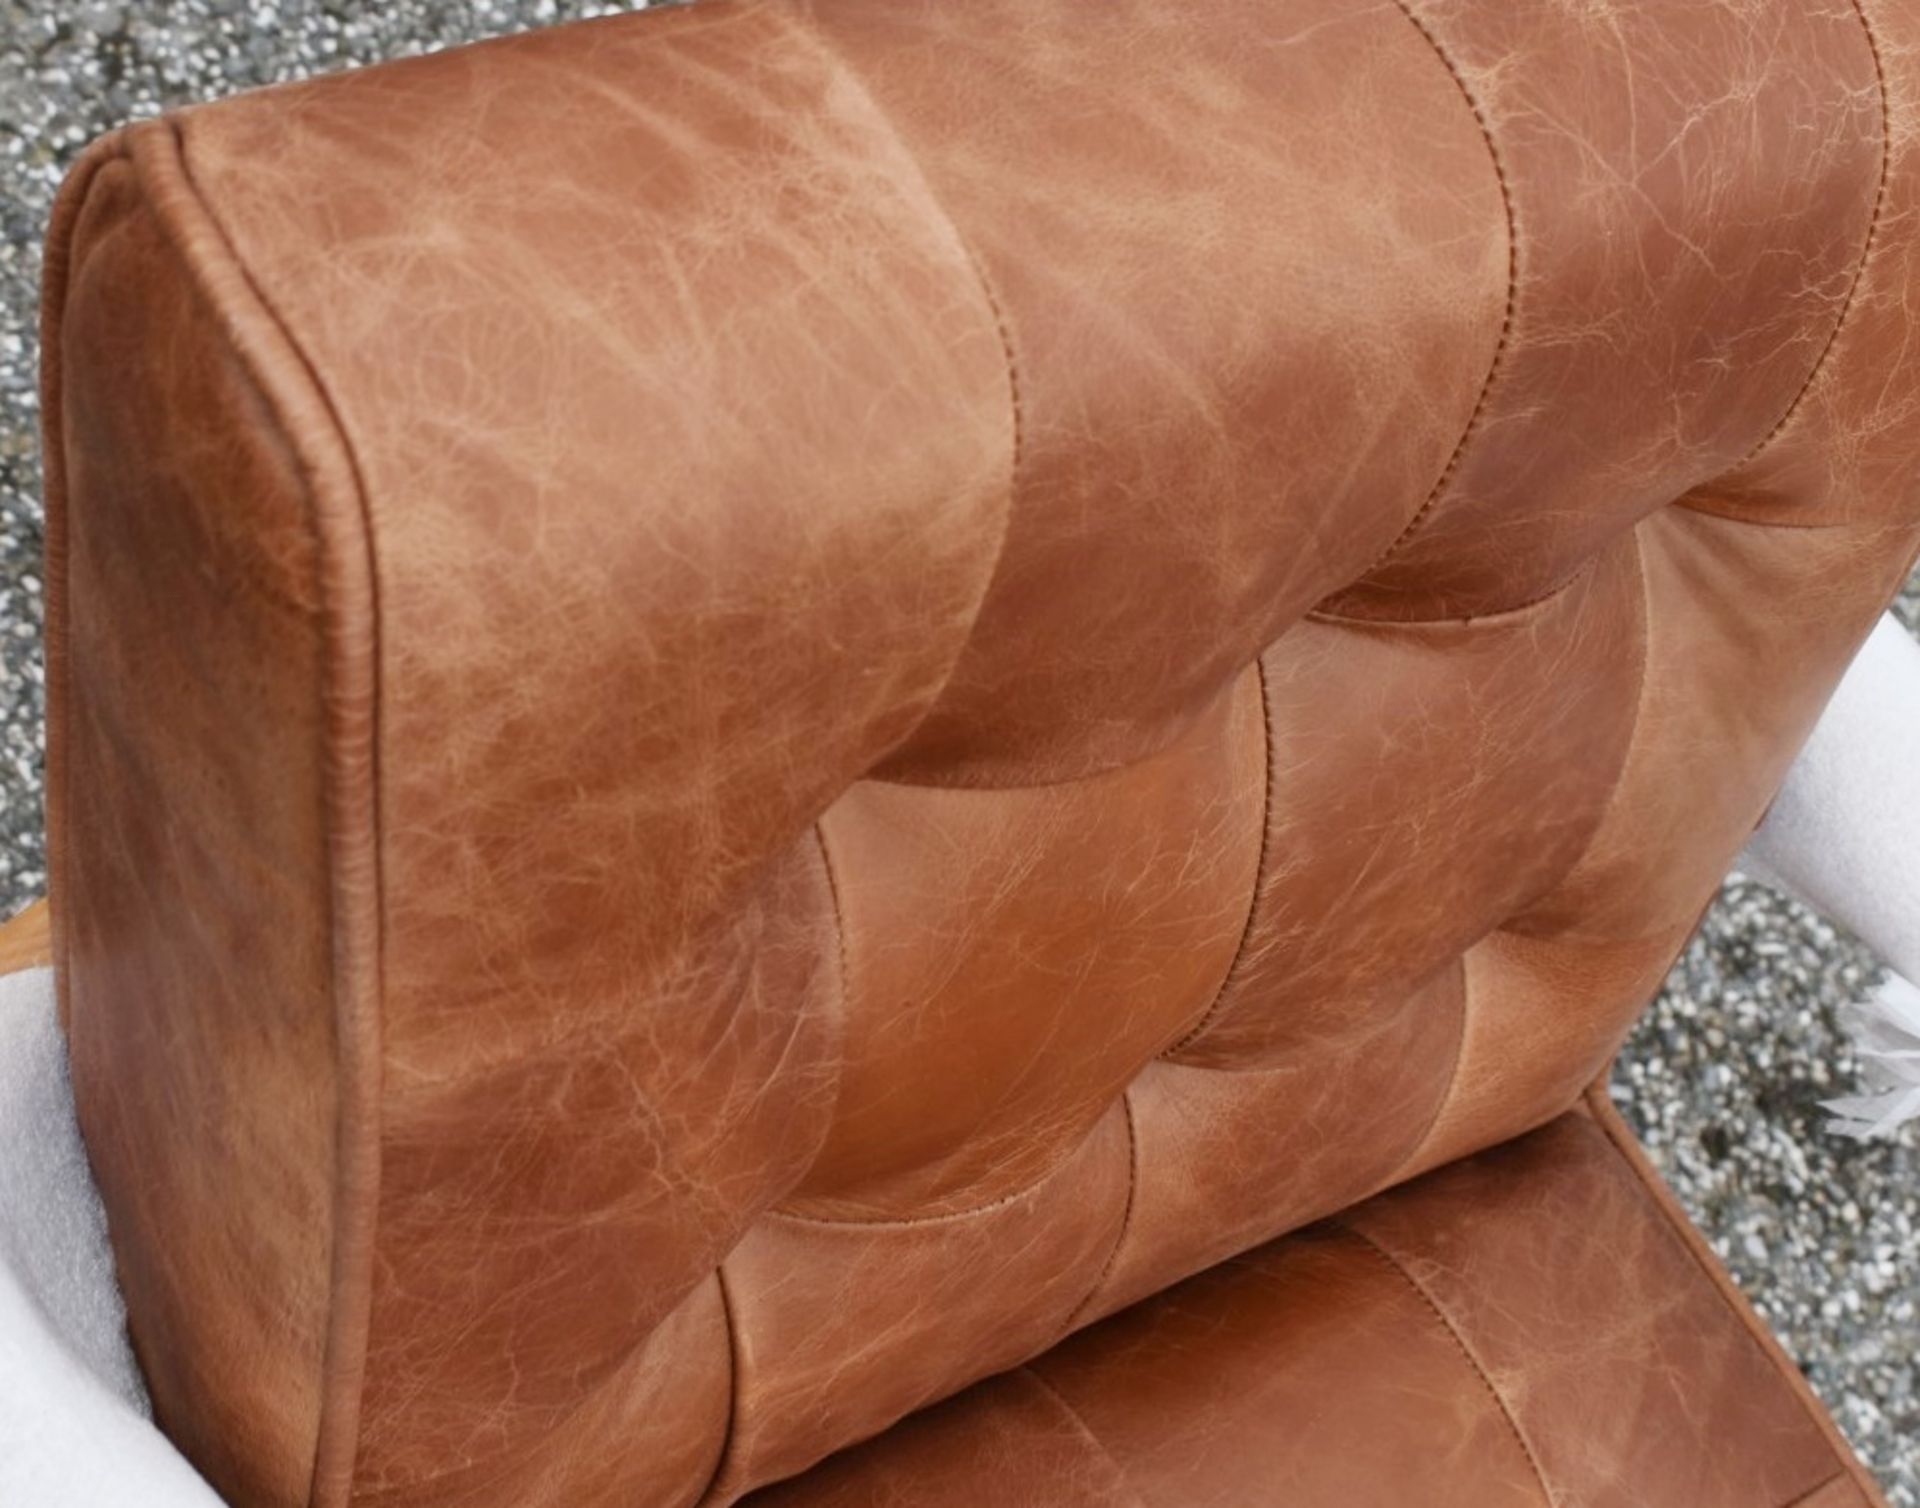 1 x 'Humber' Armchair Upholstered Vintage Brown Leather - New / Unused Stock - CL011 - Location: - Image 7 of 7